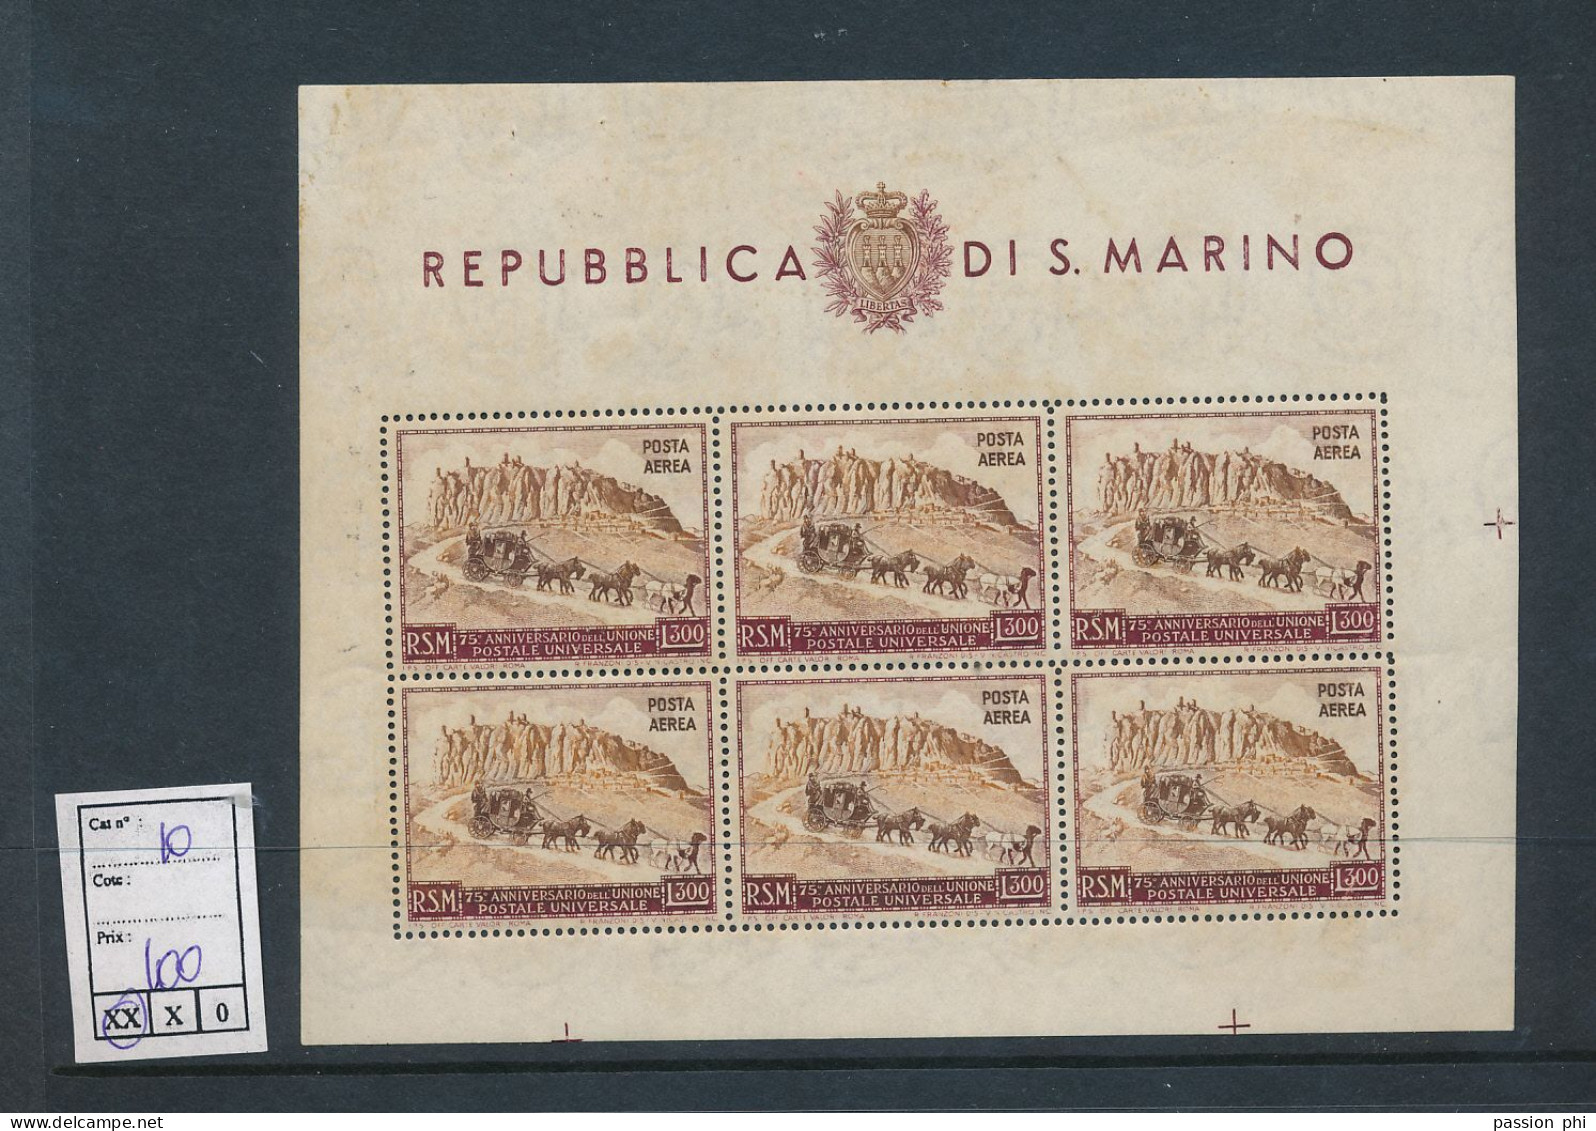 ST. MARINO SASSONE 10 MNH A LACK OF GUM AT THE TOP NORMAL FOR THIS BLOCK TWO PIN HOLES ON THE TOP - Blocs-feuillets